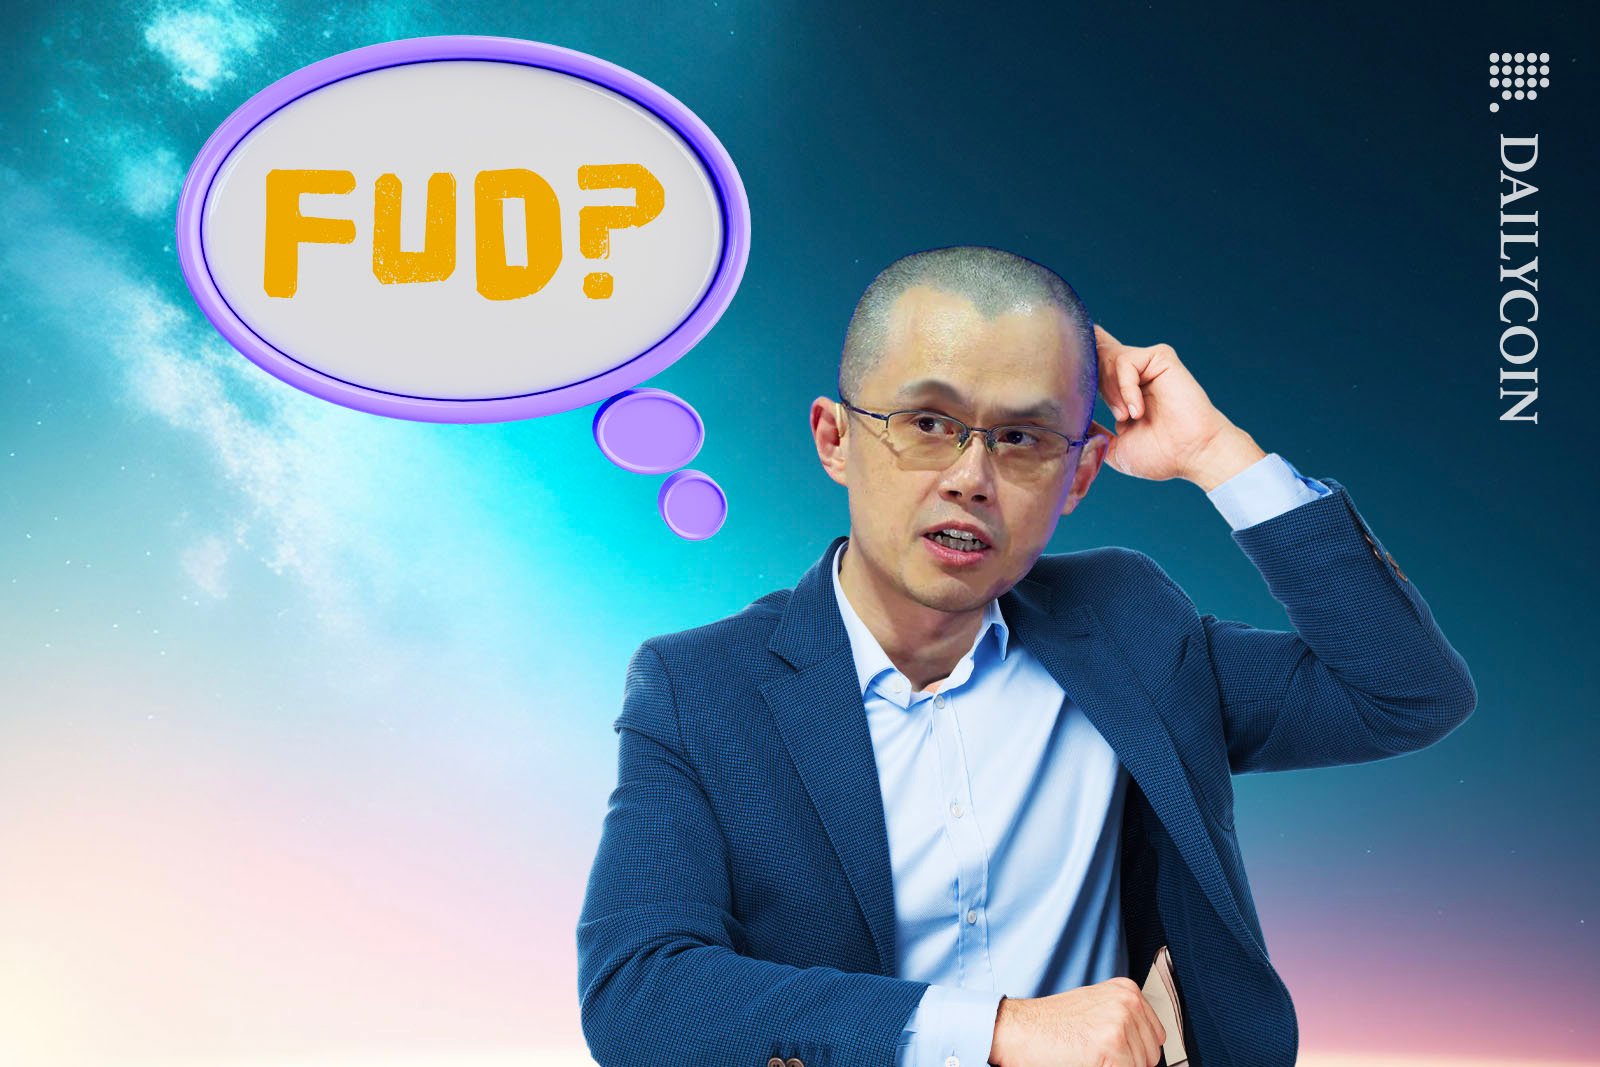 Changpeng Zhaou thinking if his favorite word "FUD".